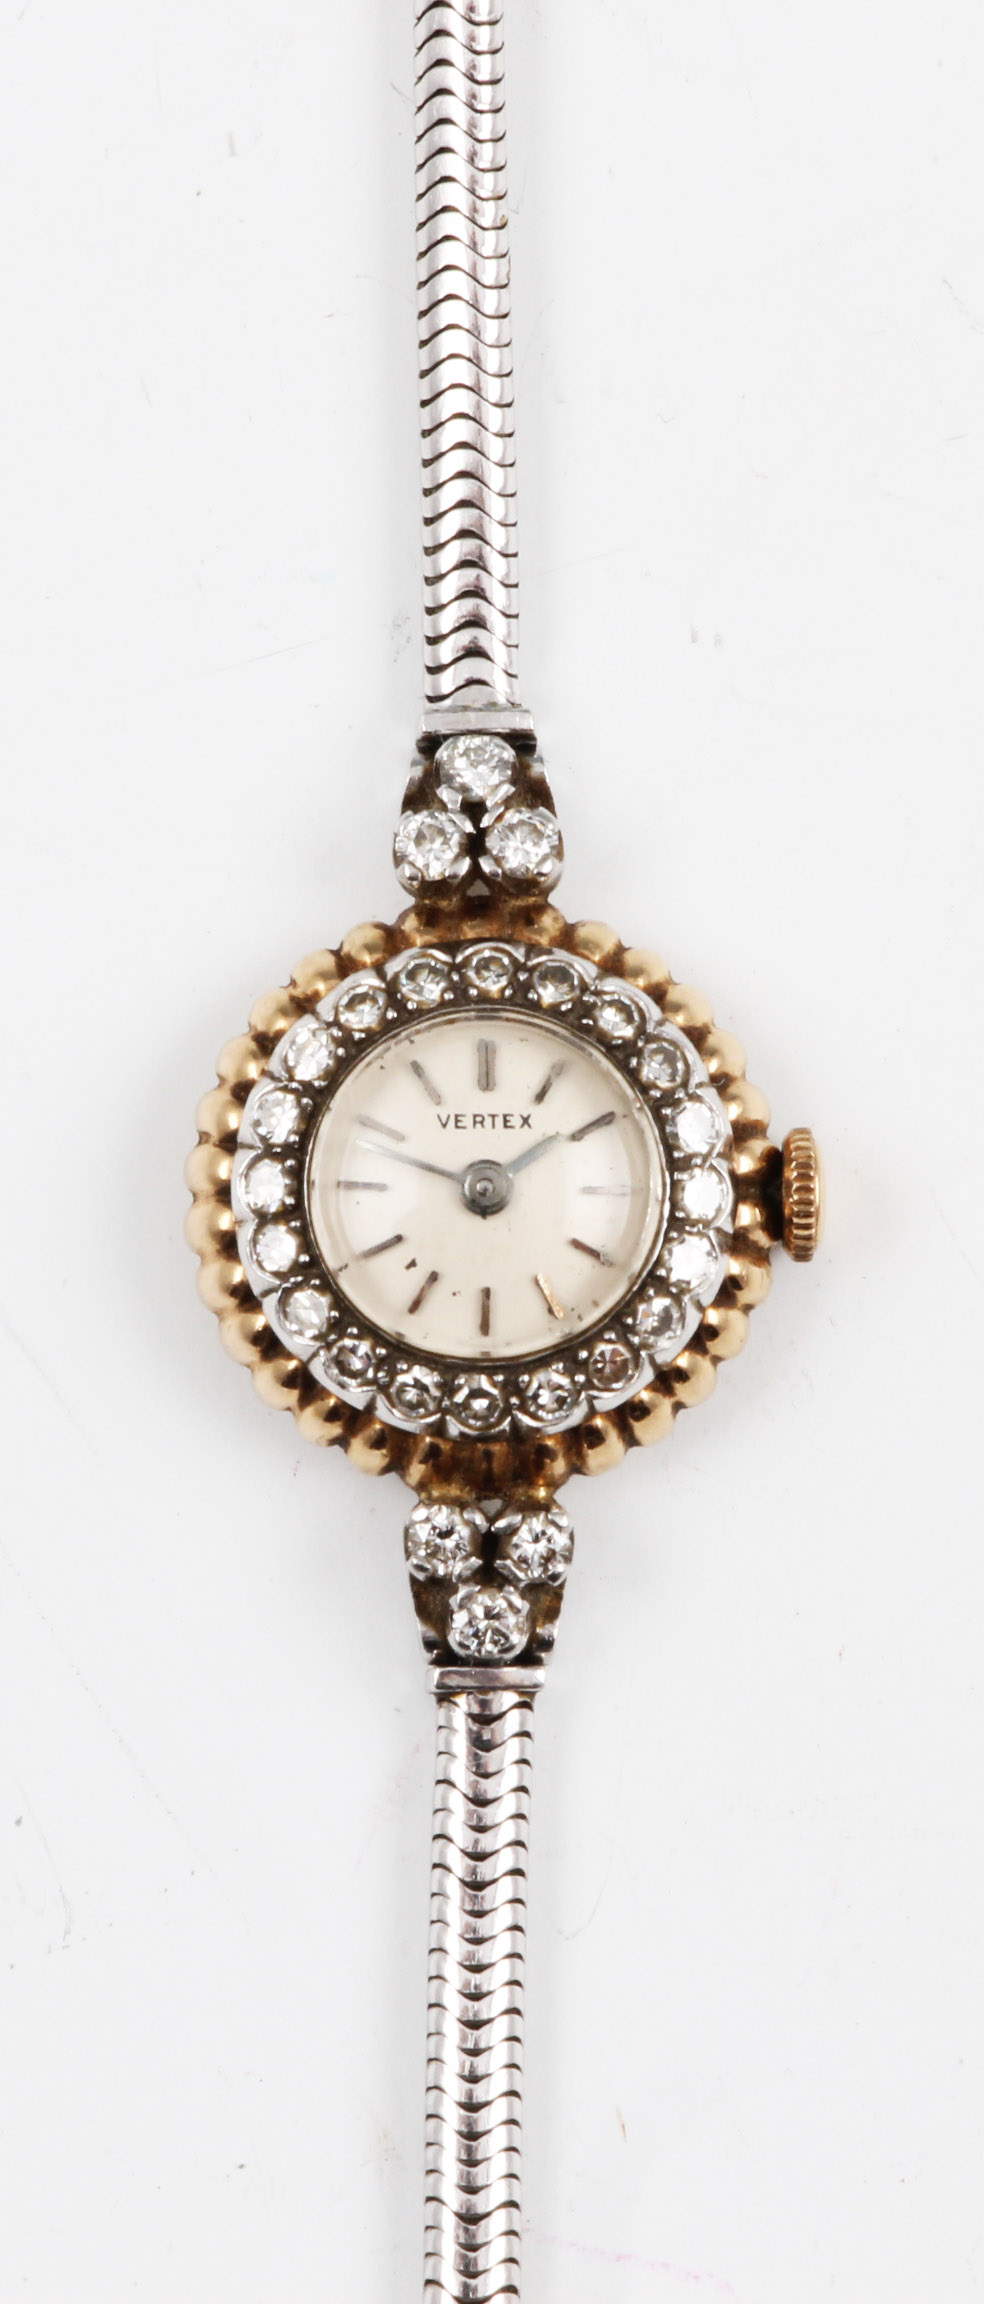 A yellow metal cased Vertex wrist watch, the cream tone dial having hourly baton markers, with bezel - Image 3 of 4